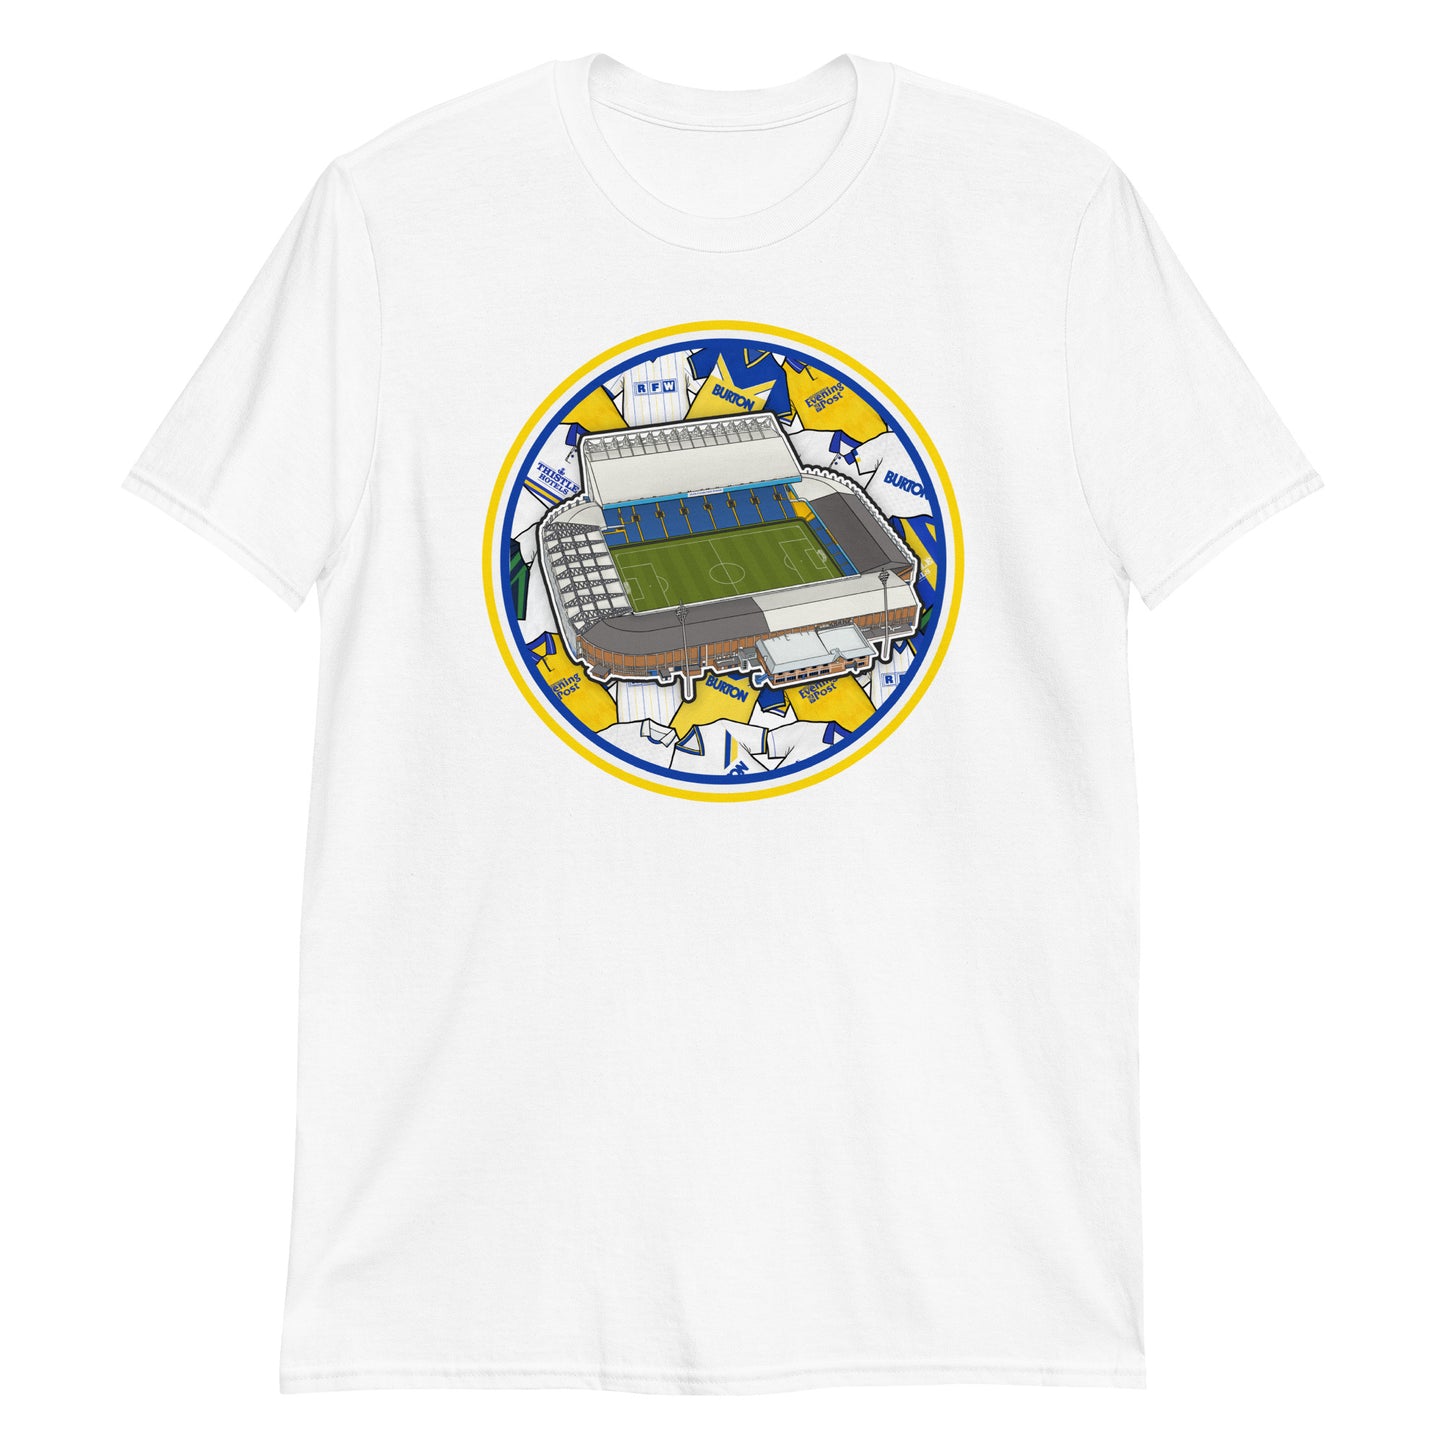 White Retro themed Leeds United inspired T-shirt featuring the iconic Elland Road Stadium & historic jerseys in the background